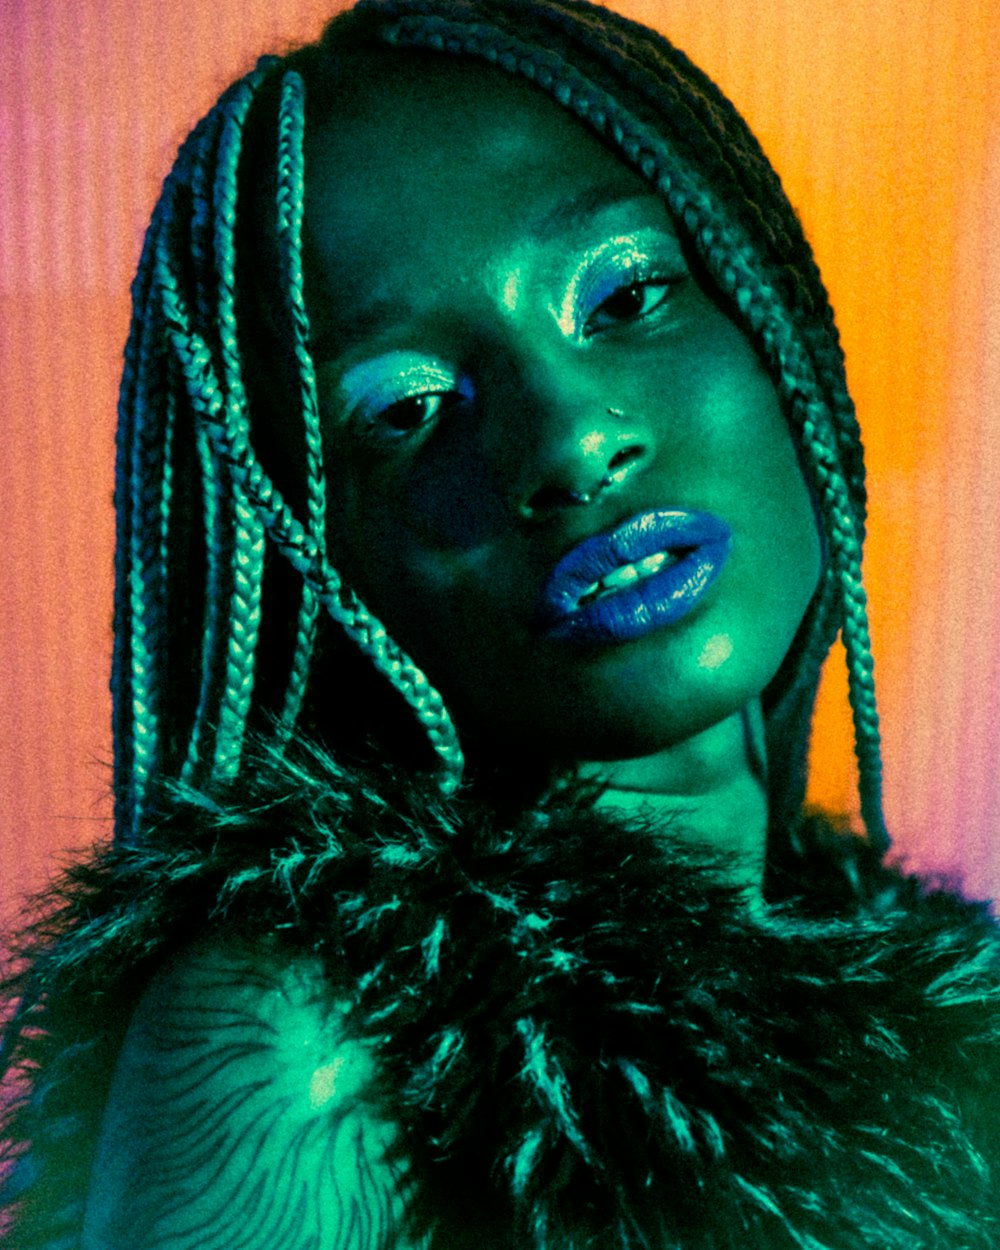 a woman with blue makeup and dreadlocks